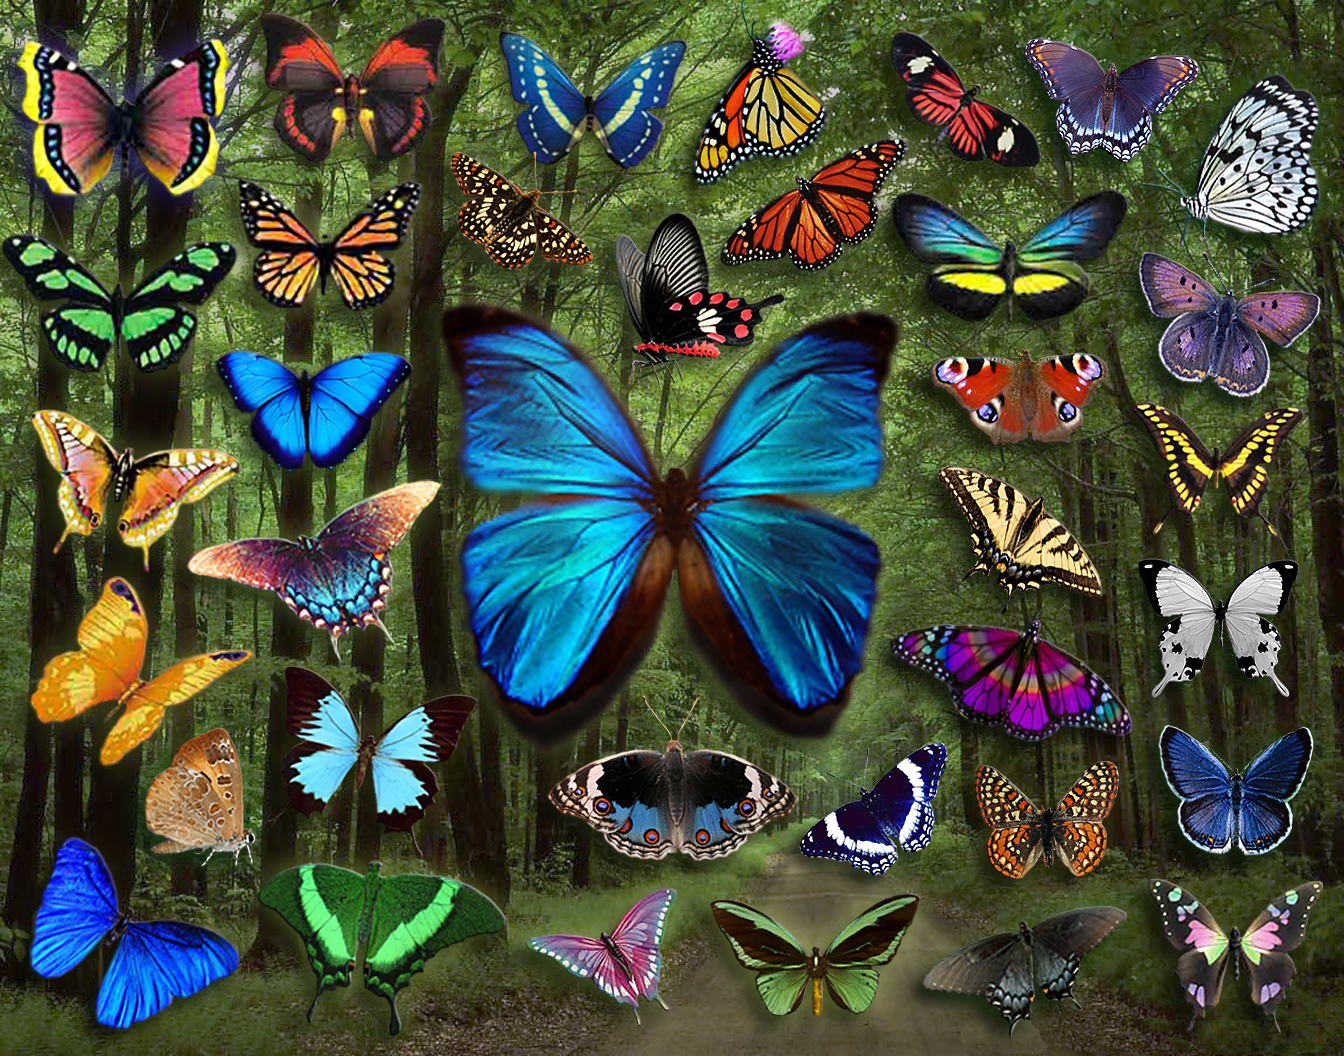 Free download Butterflies image Butterfly Collage HD wallpaper and background [1344x1056] for your Desktop, Mobile & Tablet. Explore Butterfly Wallpaper Imaged Butterfly Wallpaper, Wallpaper with Butterflies, Free Butterfly